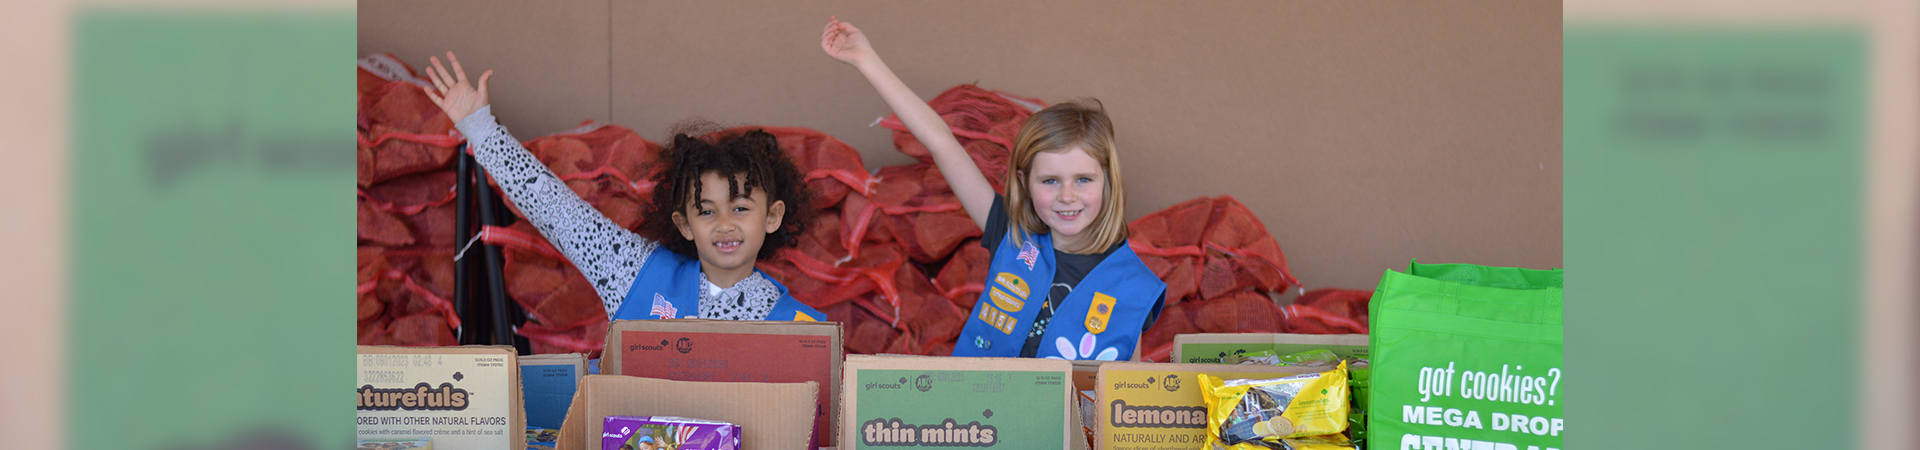  girl scout wearing uniform sash putting trefoil girl scout cookie boxes into cookie transport bag 